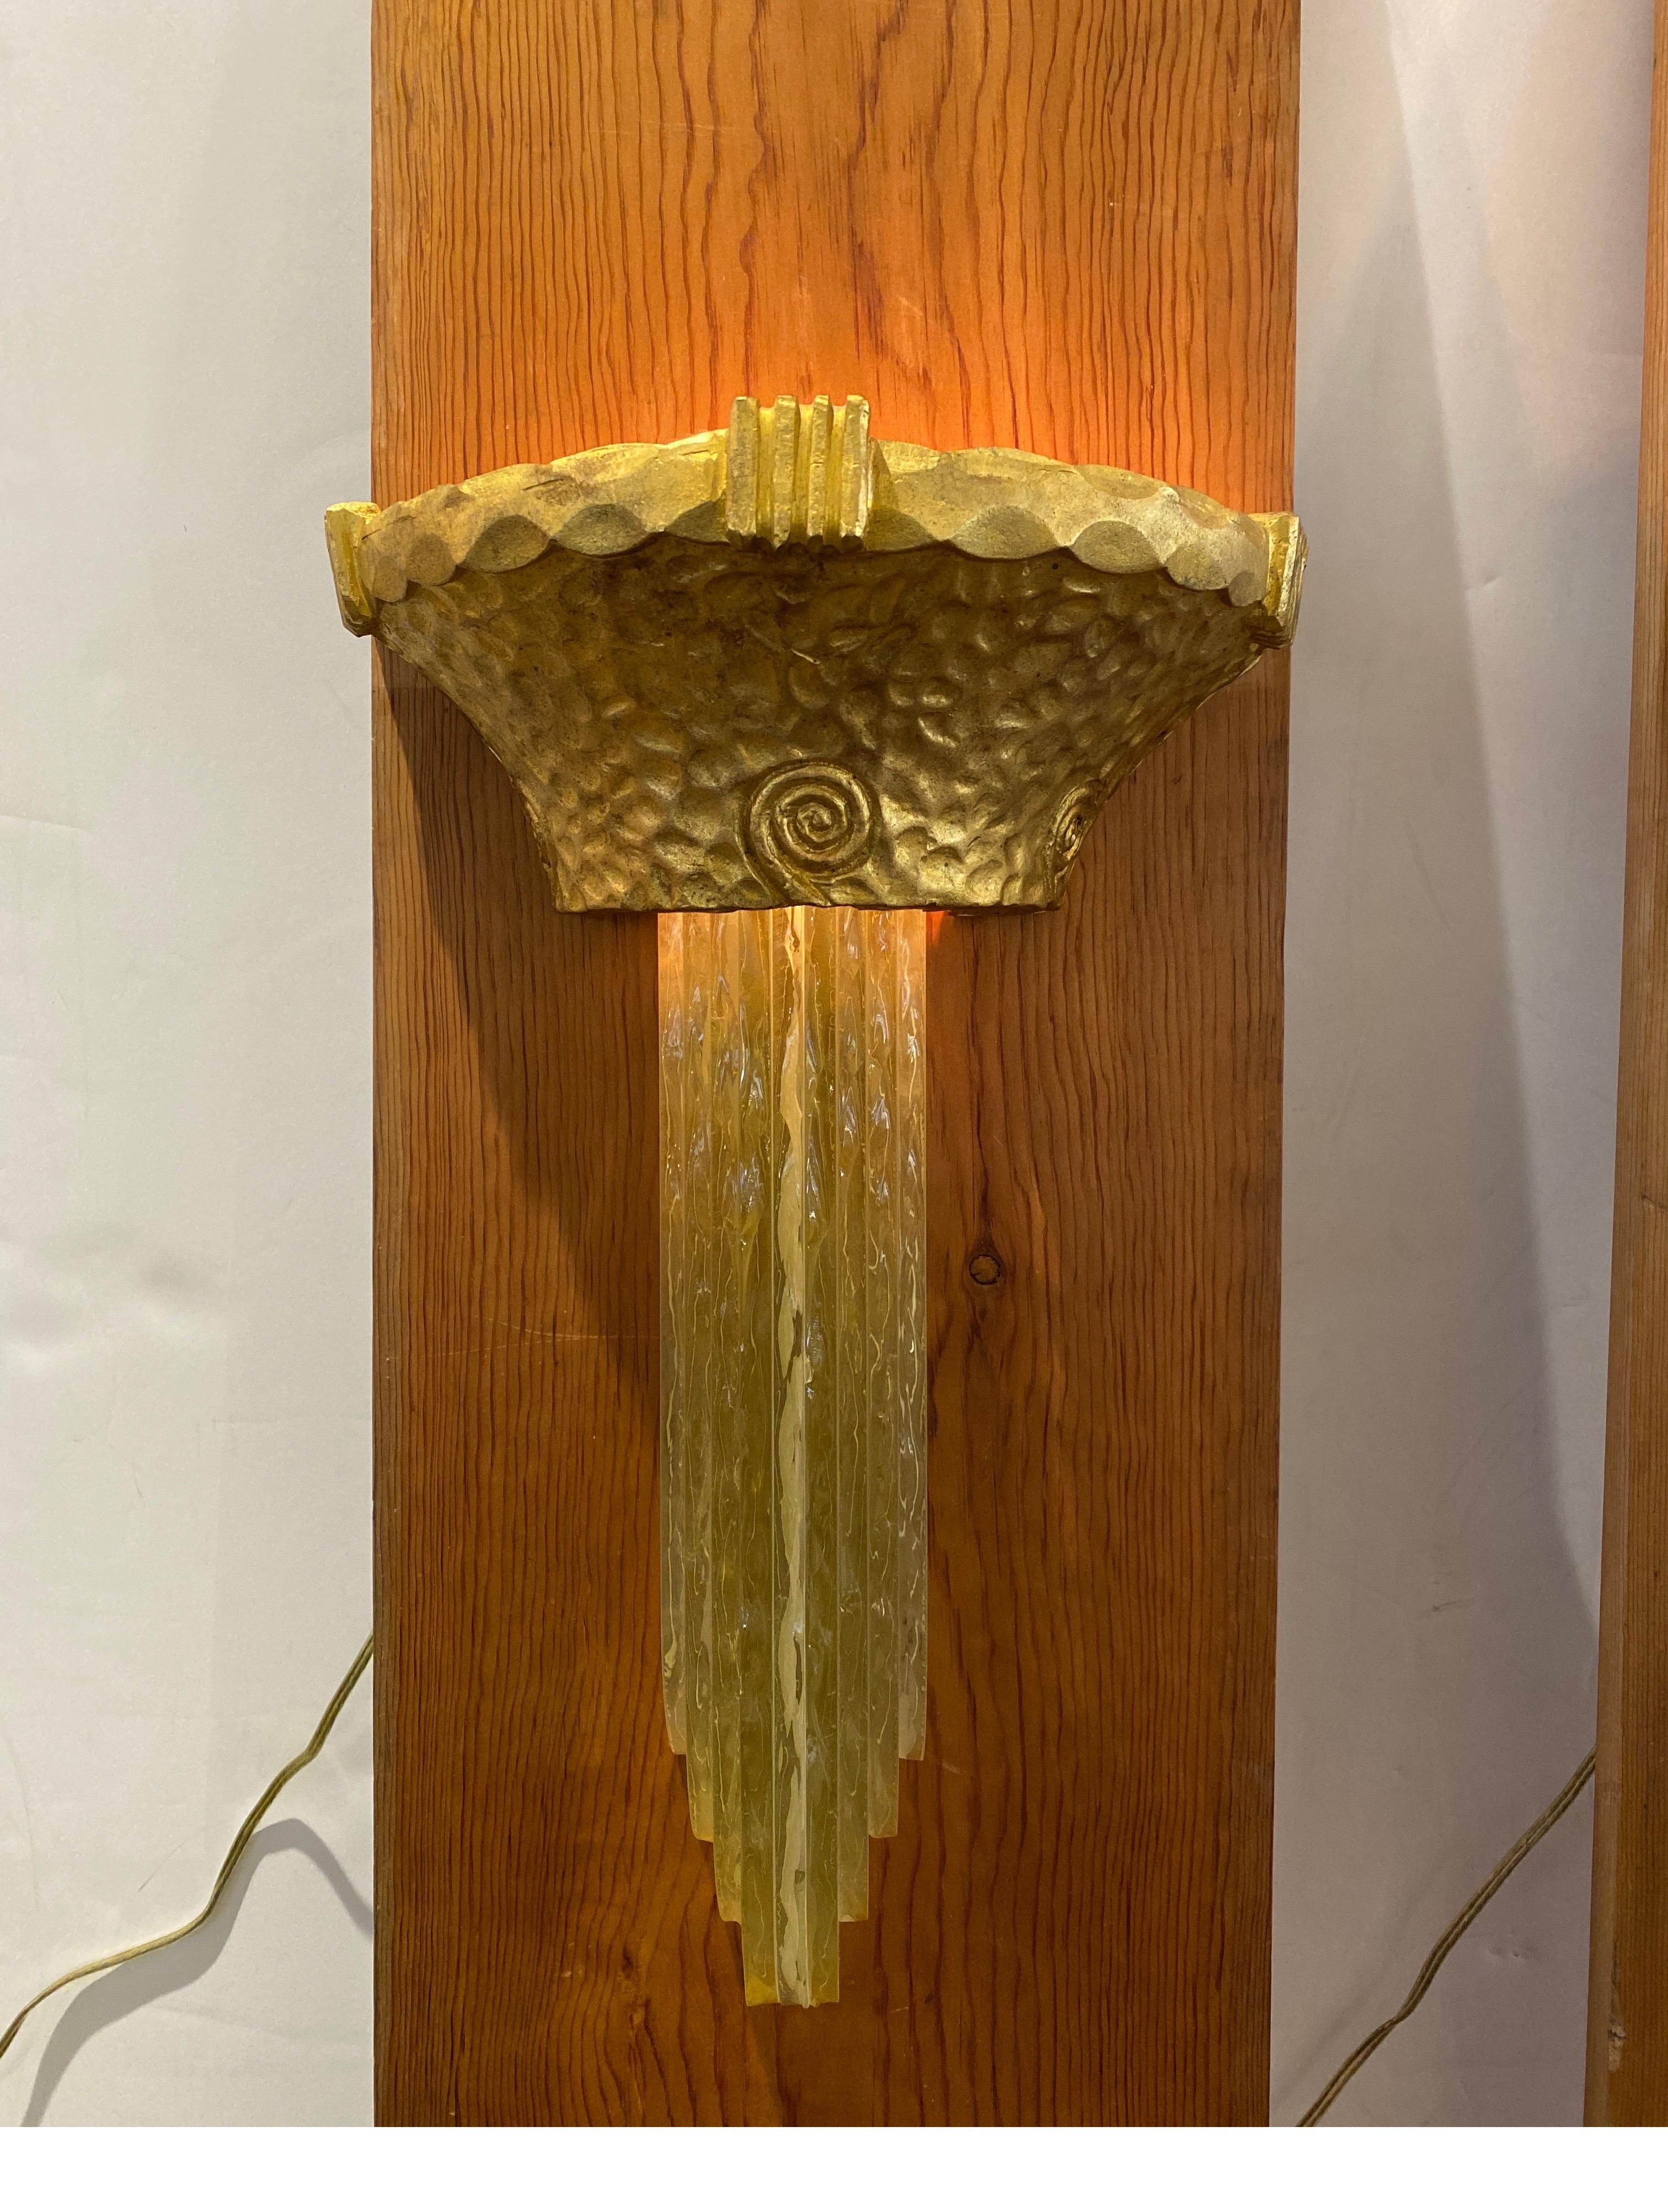 Remarkable pair of hammered bronze and stacked glass Art Deco wall sconces. The hammered gilt bronze surface with art deco decorations with variegated stacked glass panels that fit into the cast bronze tops and diffuse the light. Each one takes two